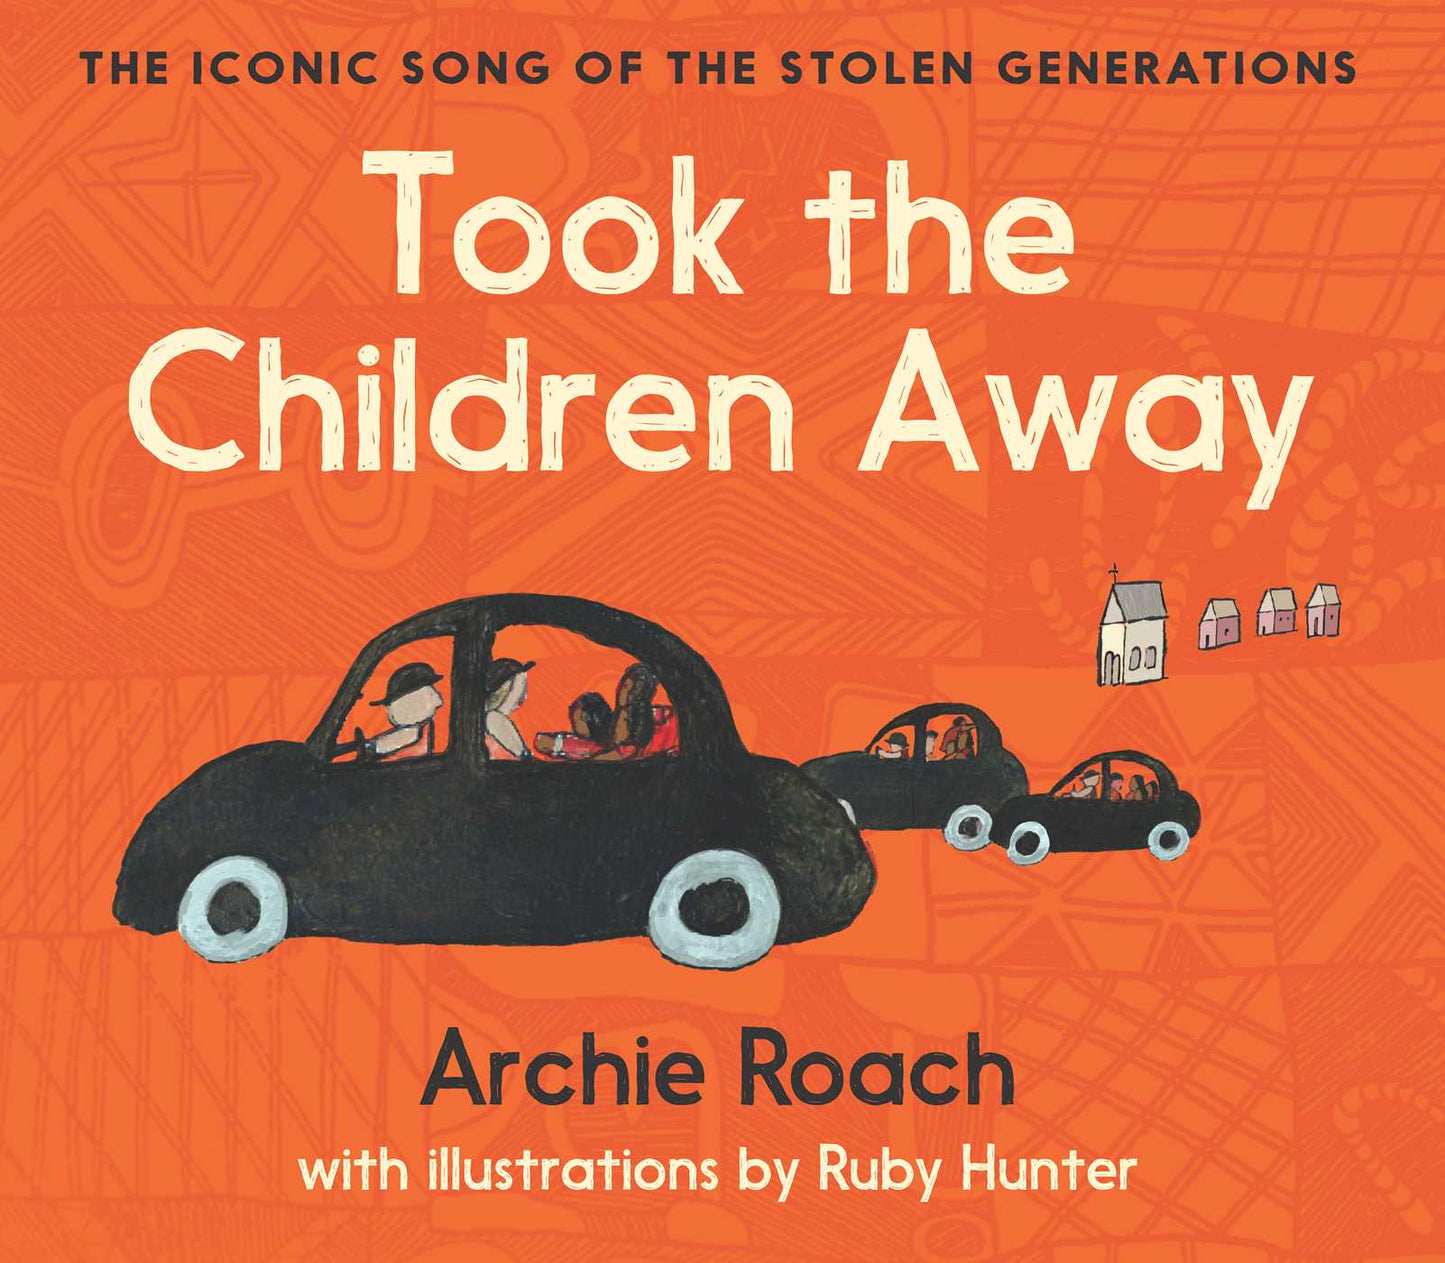 Took The Children Away by Archie Roach and Ruby Hunter